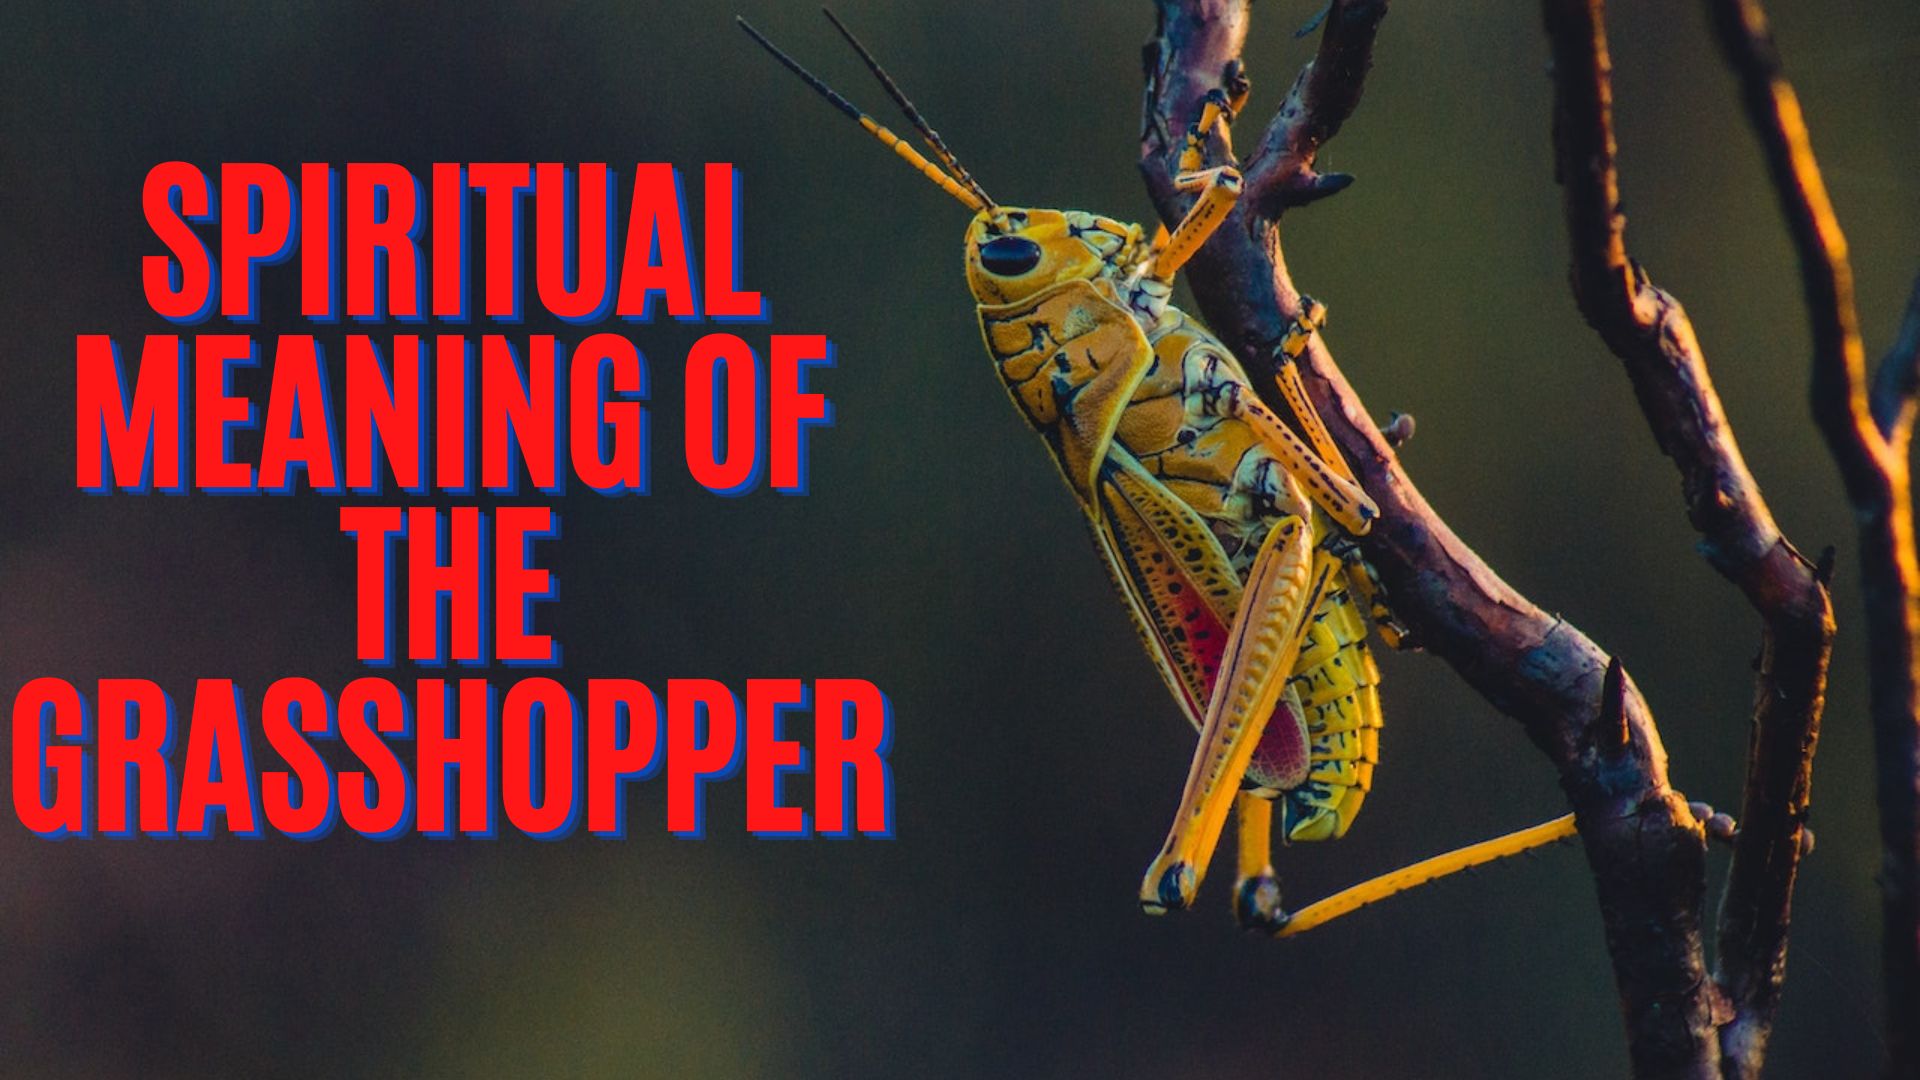 Spiritual Meaning Of The Grasshopper - Symbolizes Good Fortune, Wealth, Music, And Longevity To Some